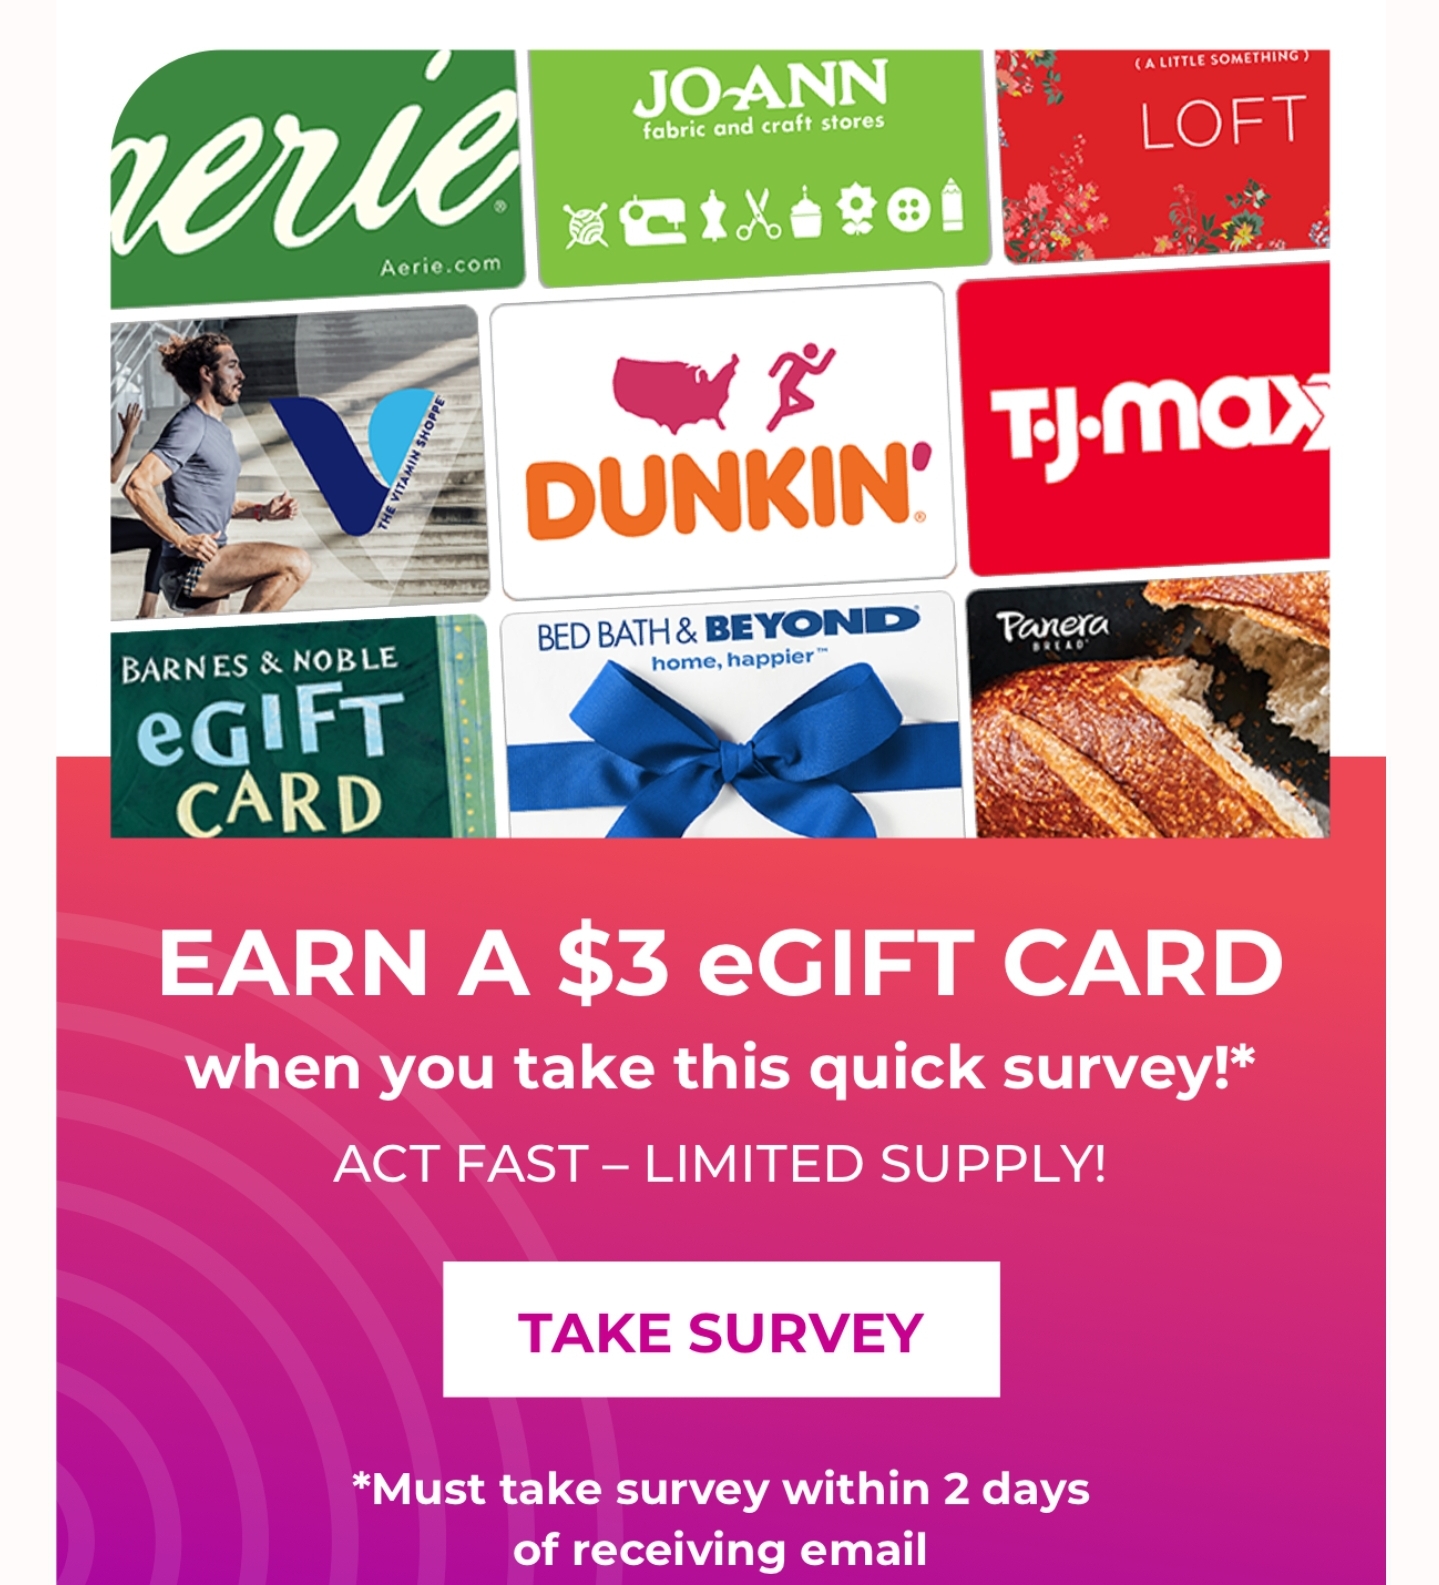 Free $3 Gift Card from P&G